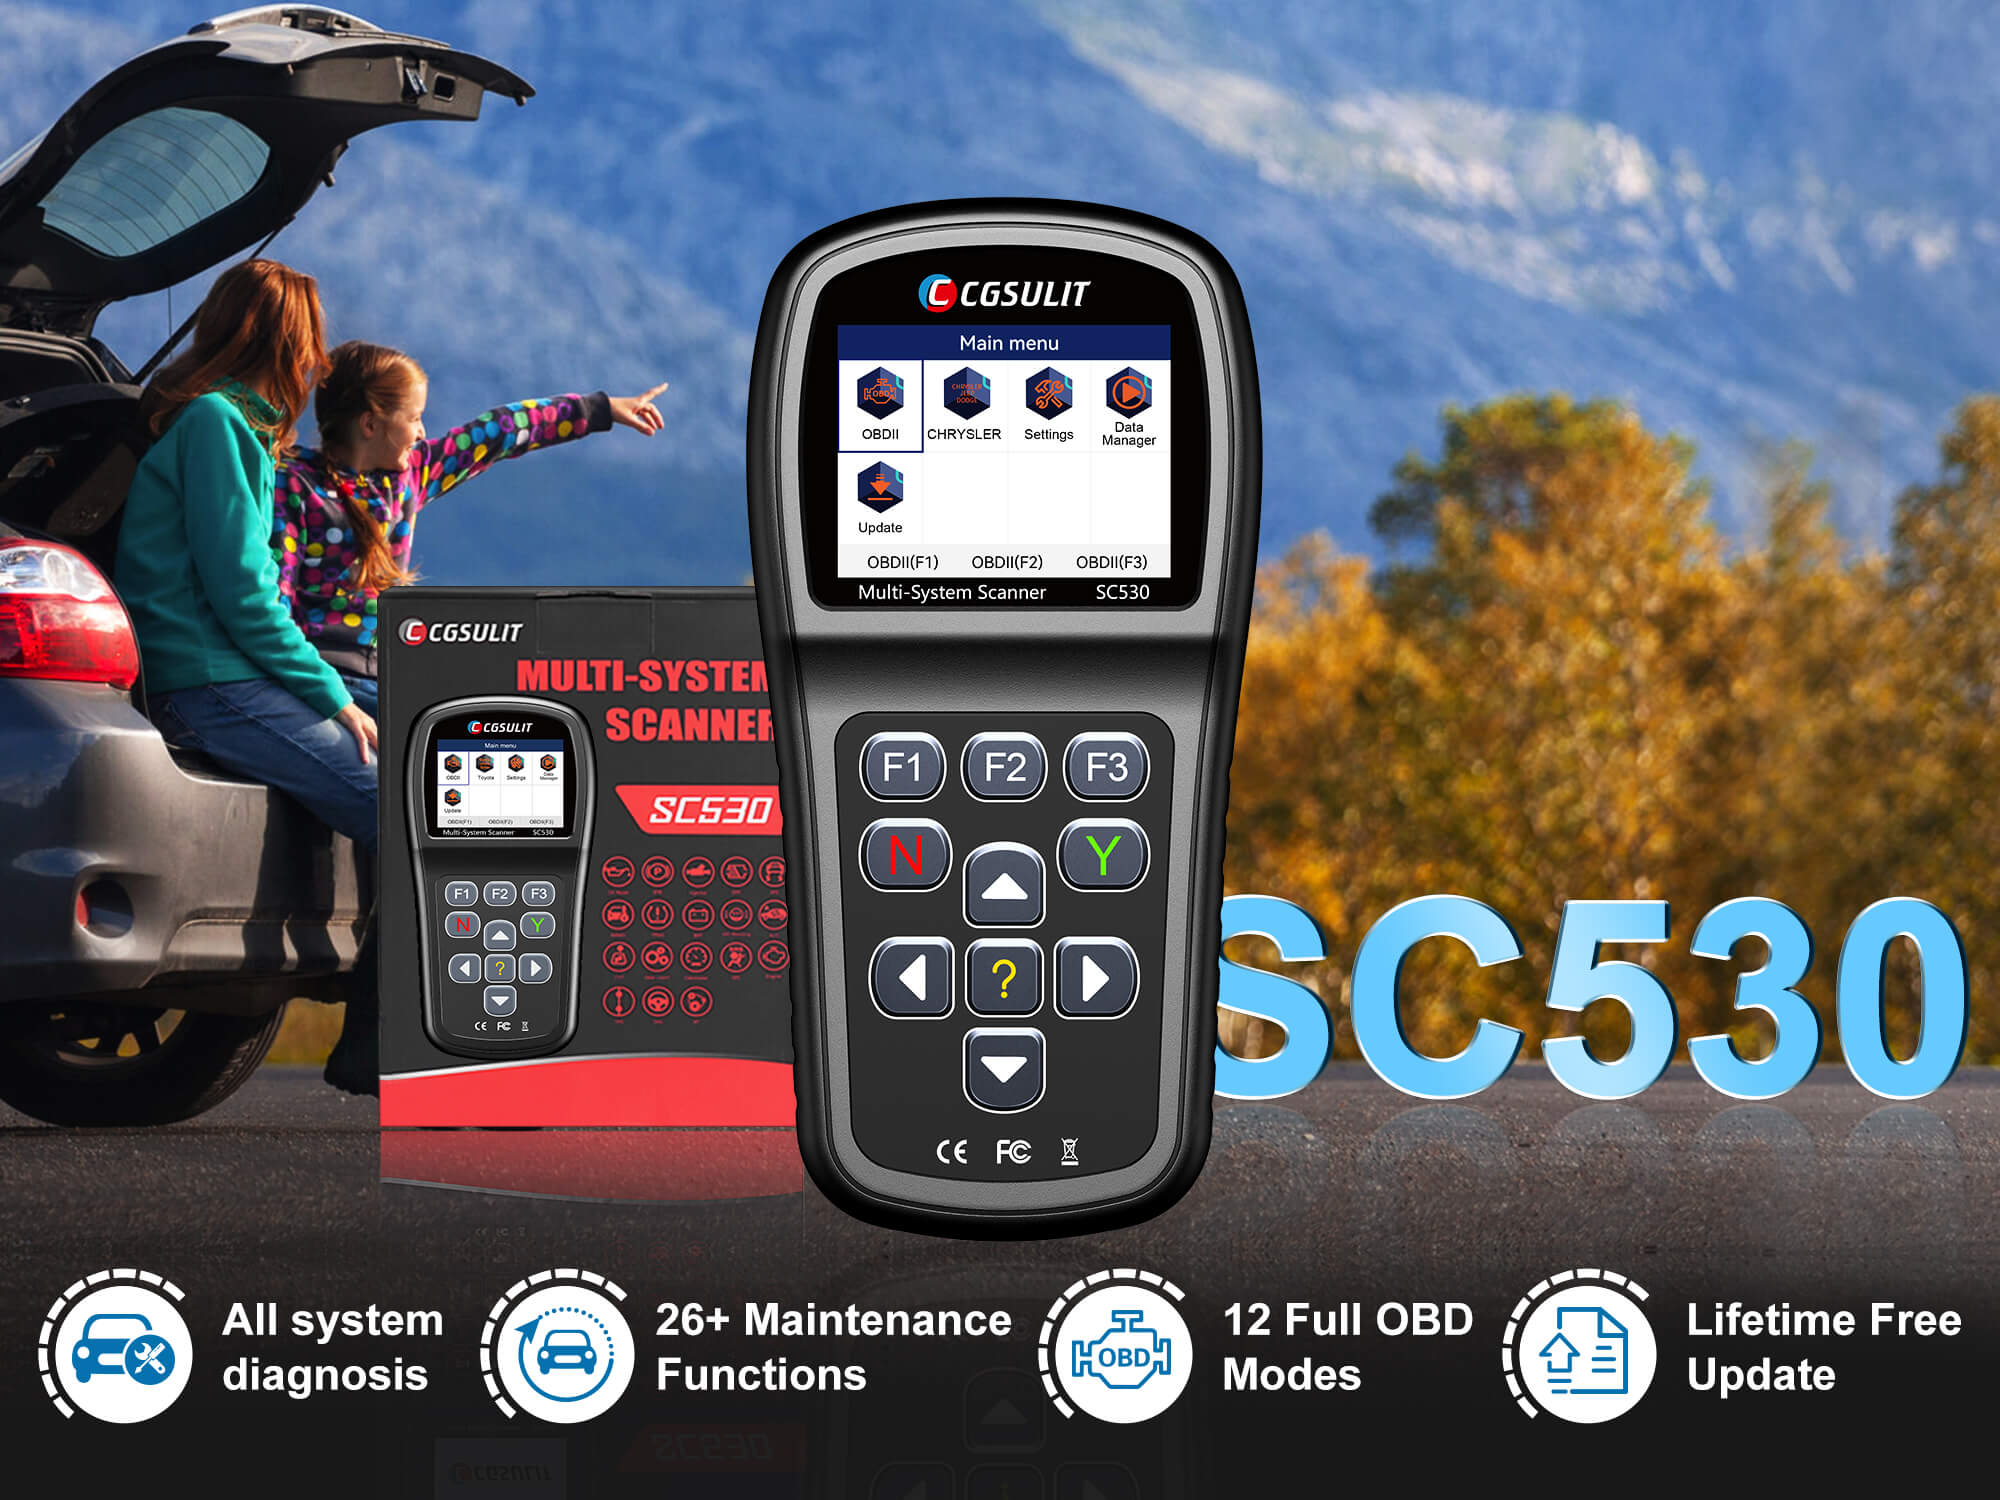 CGSULIT SC530 Chrysler/Jeep/Dodge Scan Tool support full system diagnosis, has 26+ reset maintenance functions, 10 obd2 modes and support lifetime free update service.